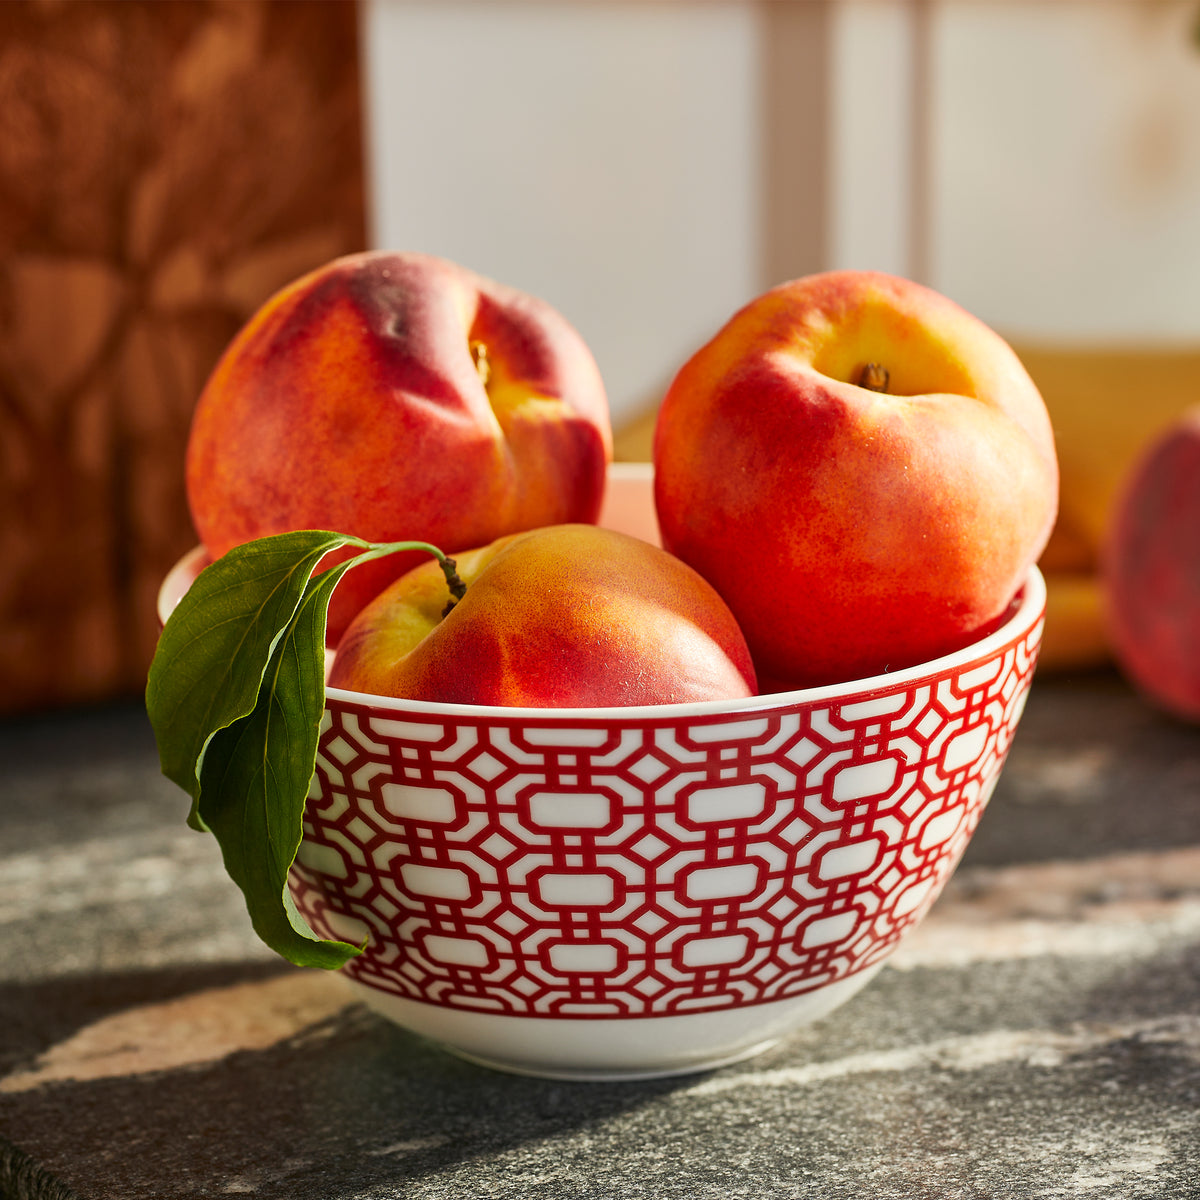 A Caskata Newport Crimson Cereal Bowl with a red geometric pattern holds four peaches, one with a leaf attached. The bowl is placed on a gray stone surface, reminiscent of the timeless elegance found at the Newport Garden Gate.